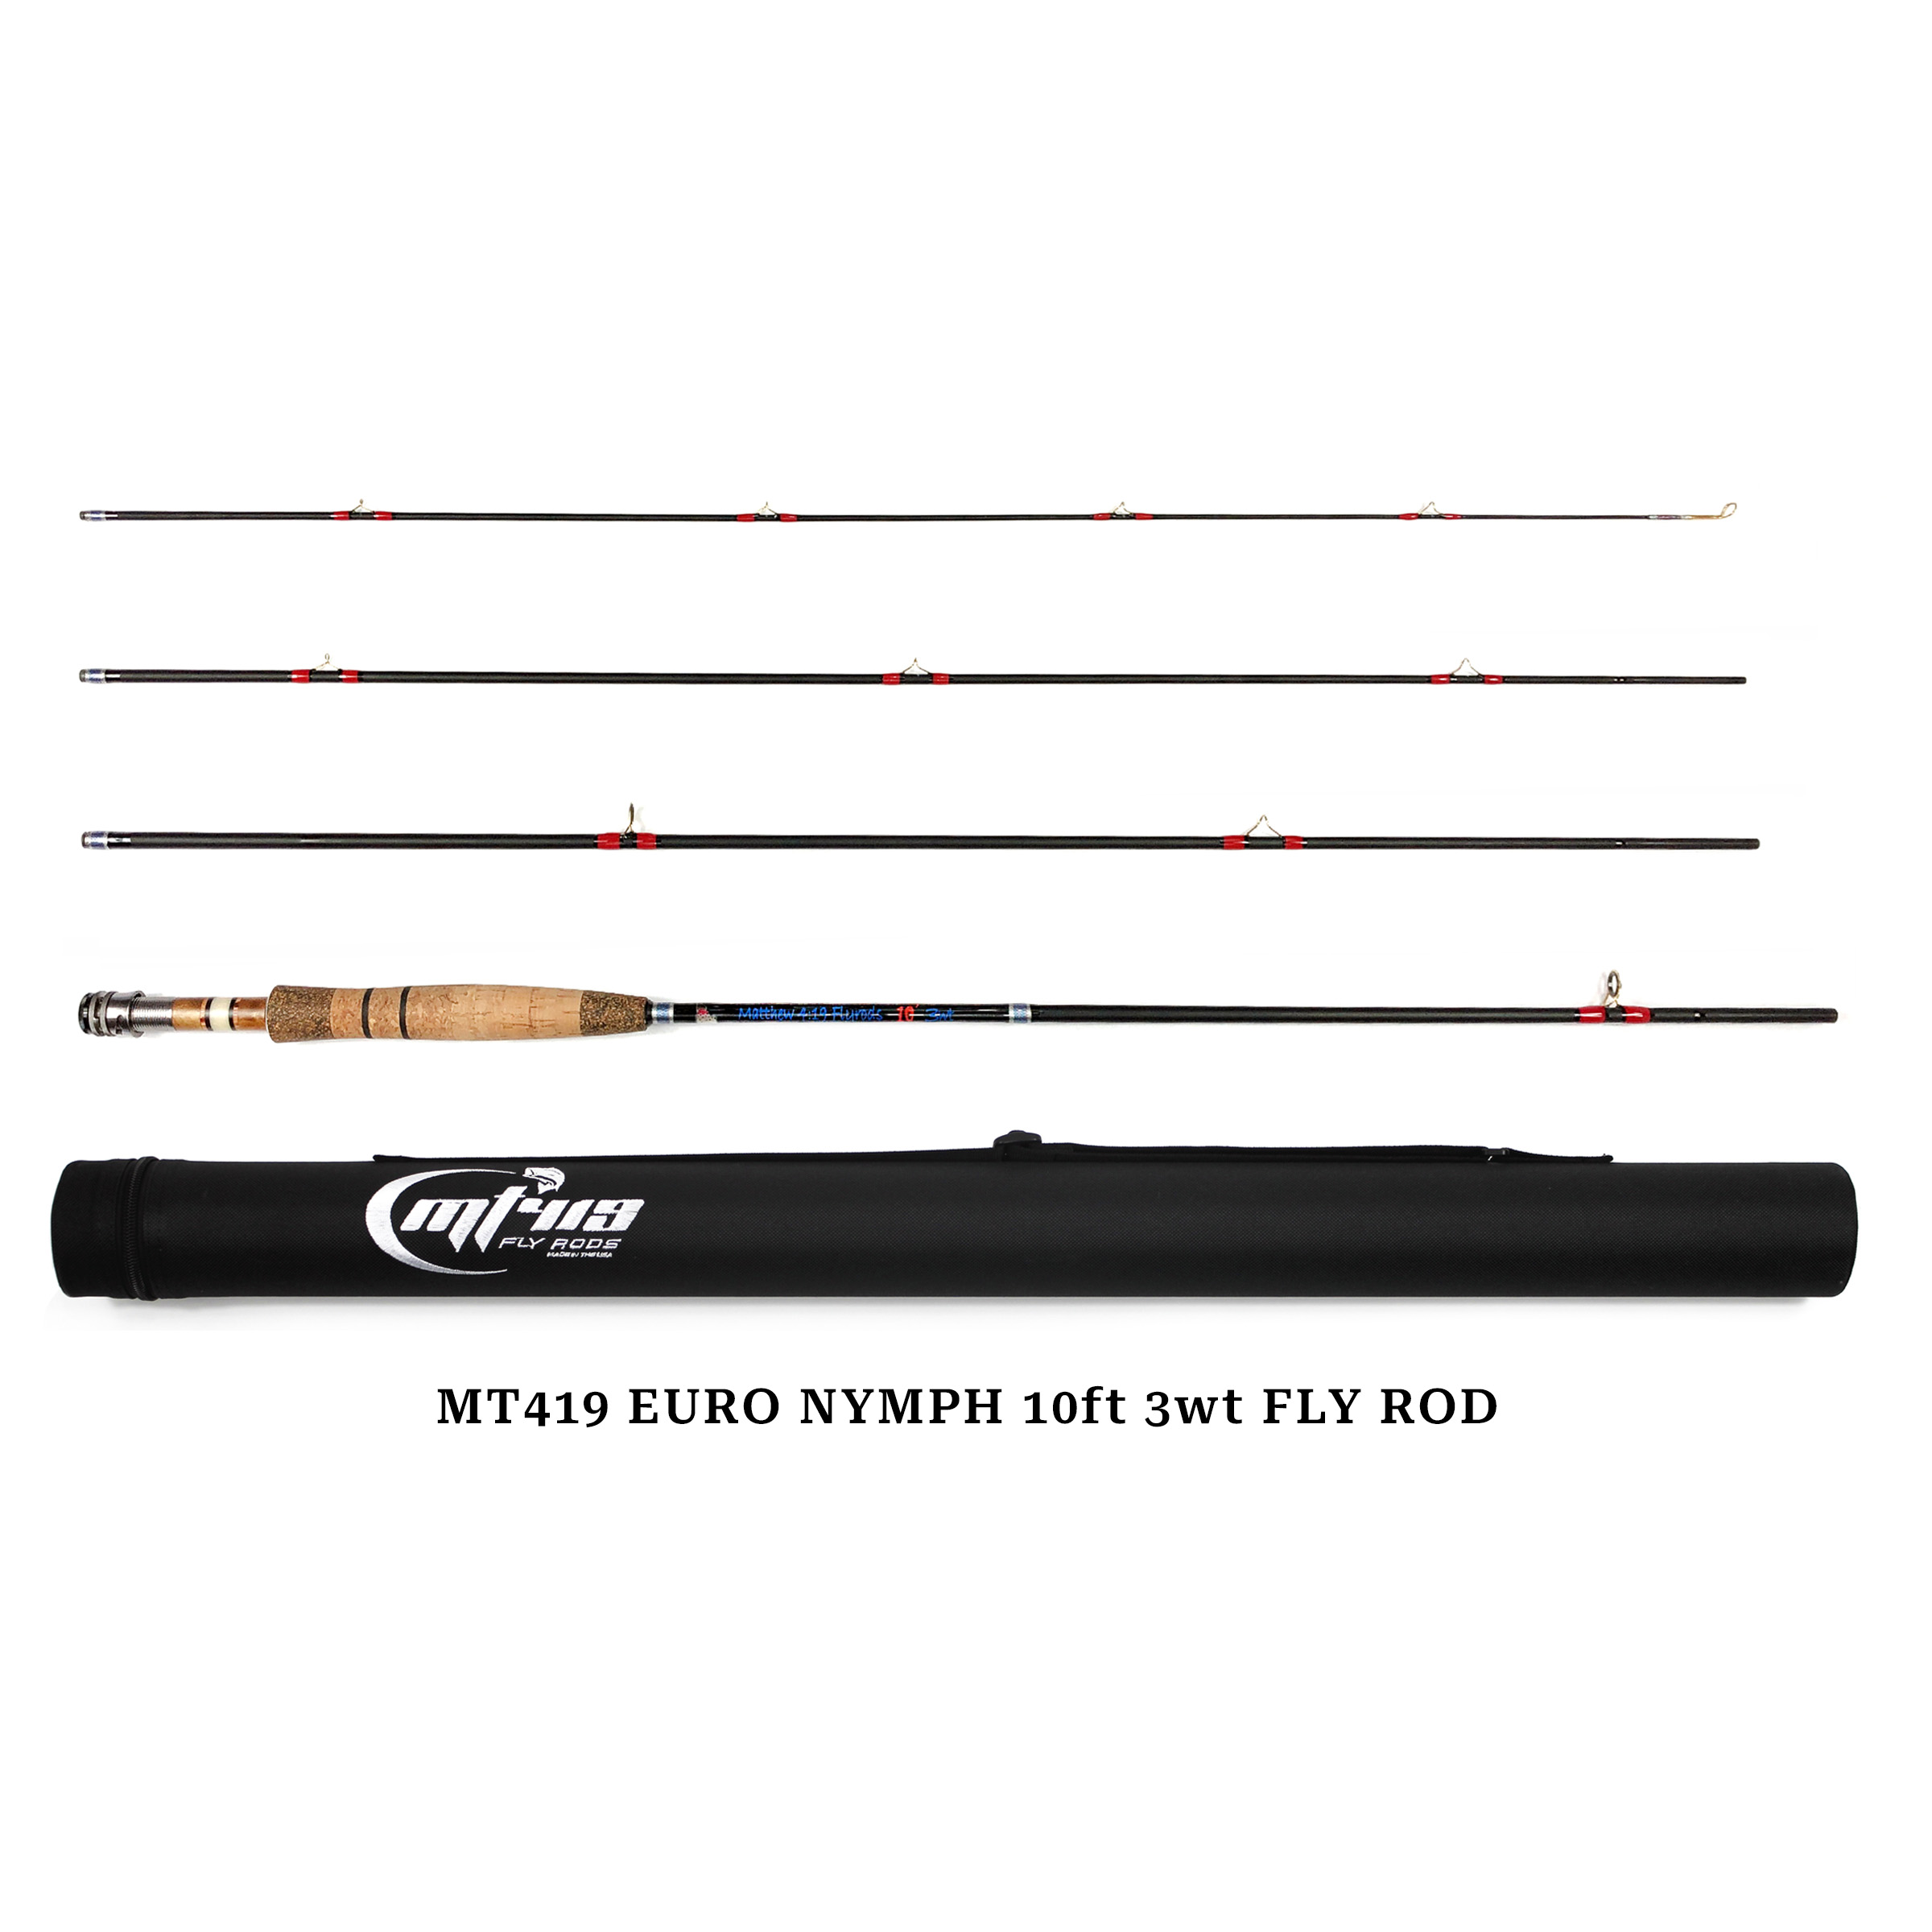 Euro Nymph Rods - MT419 FLY RODS